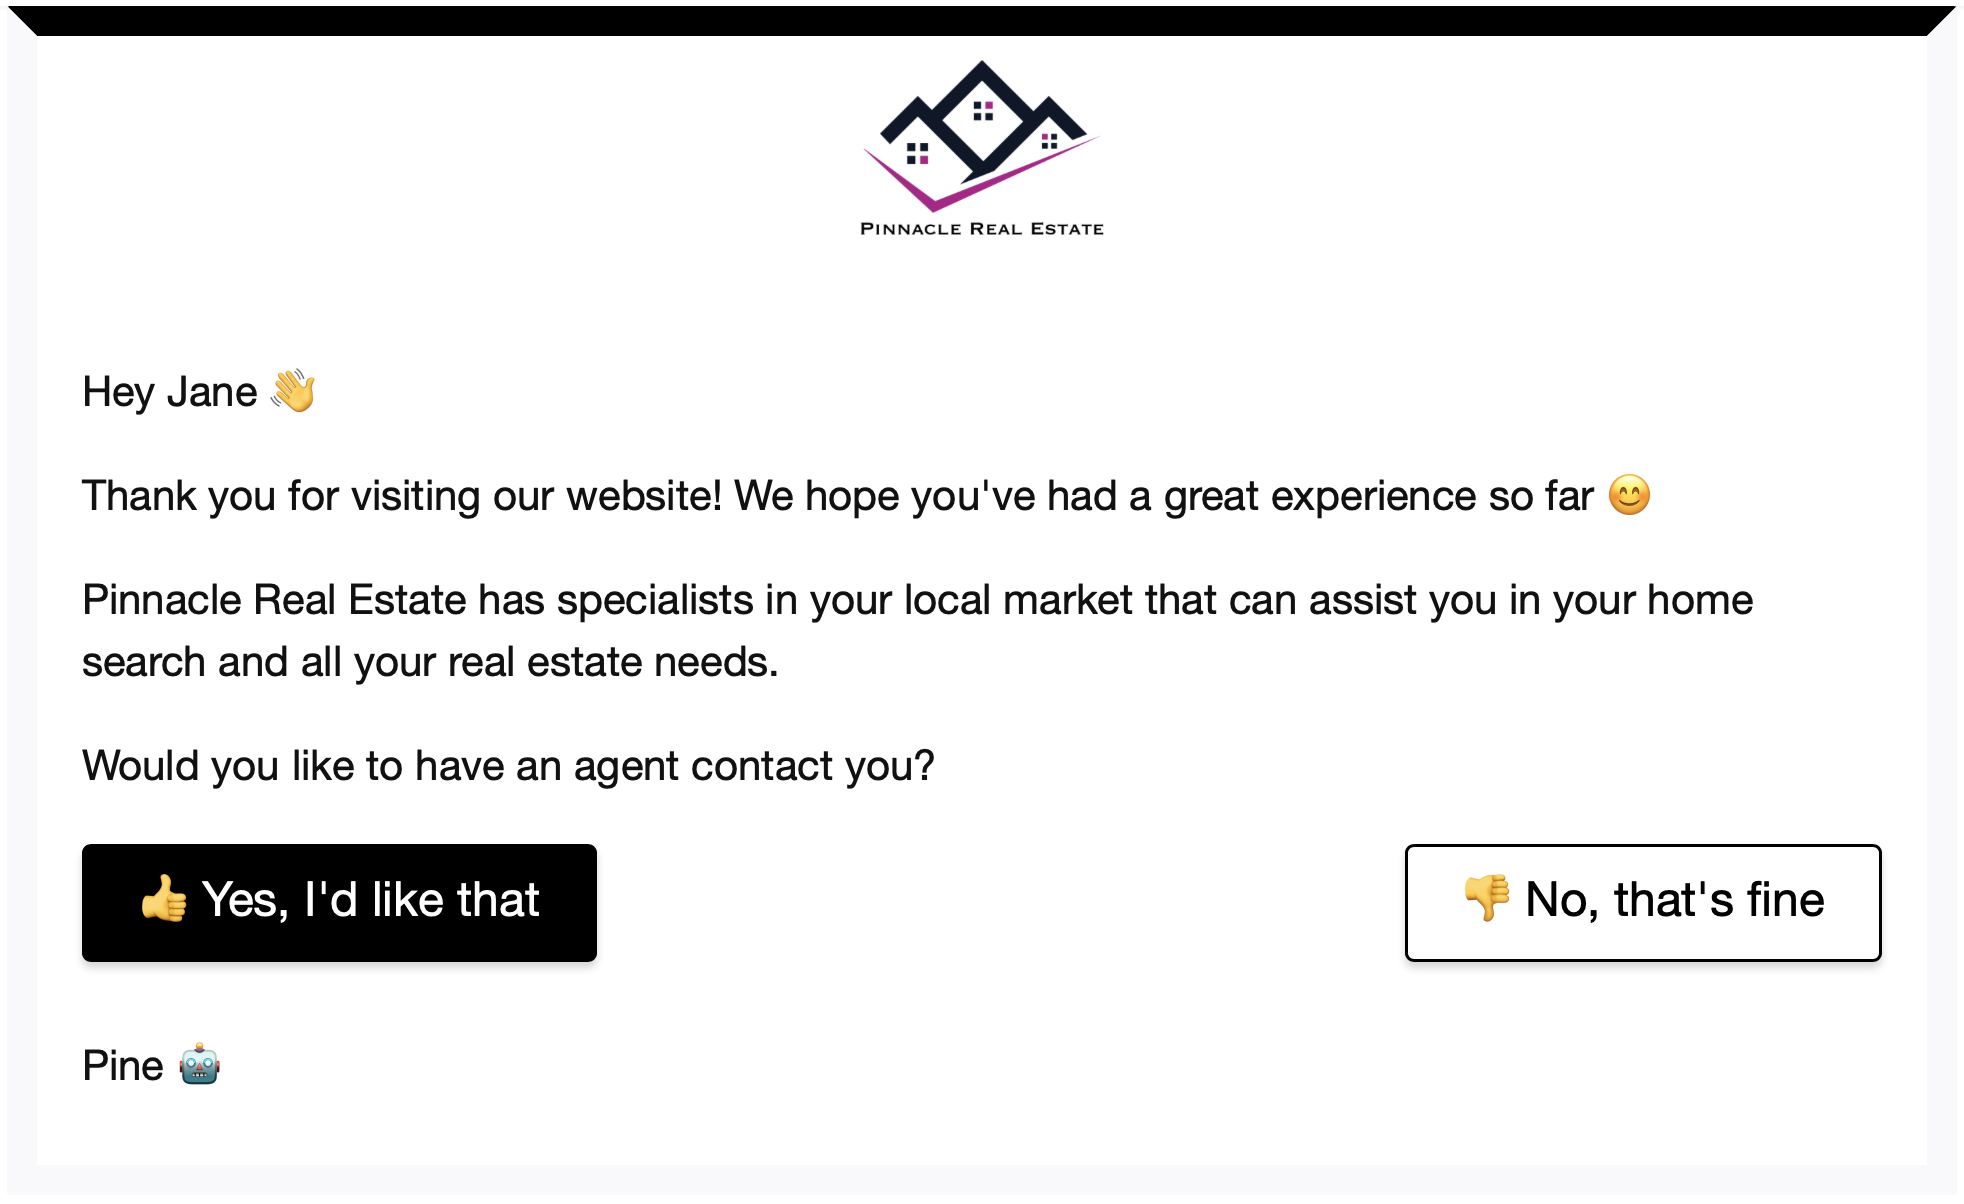 Email campaign promoting Realtors